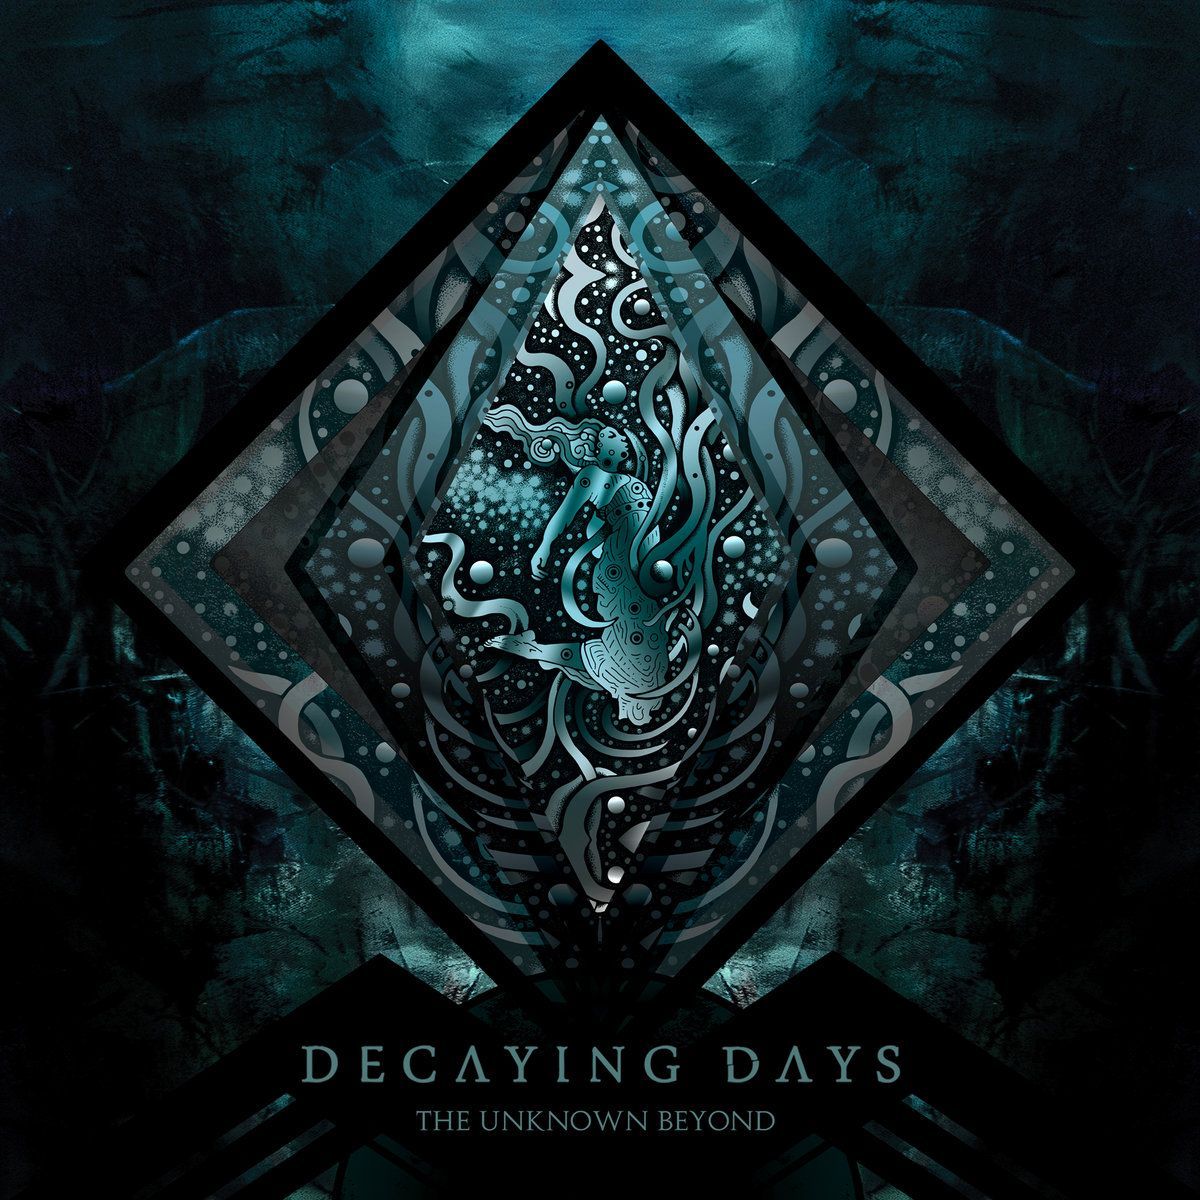 Decaying Days - A Distant Memory (audio)